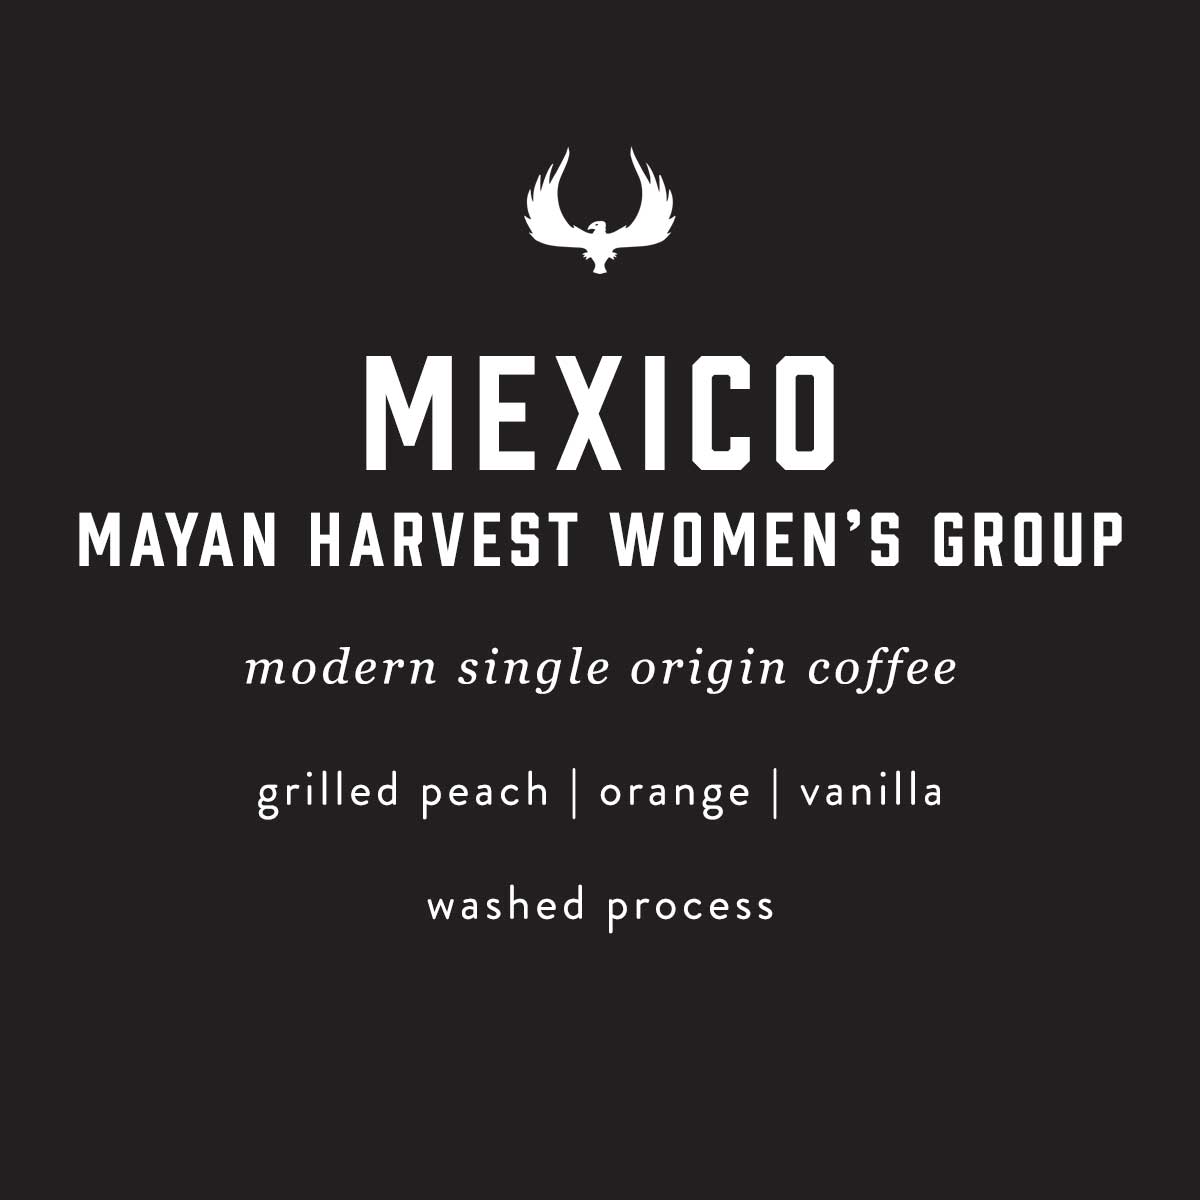 Mexico Mayan Harvest Women's Group Specialty Coffee by Press Coffee Roasters